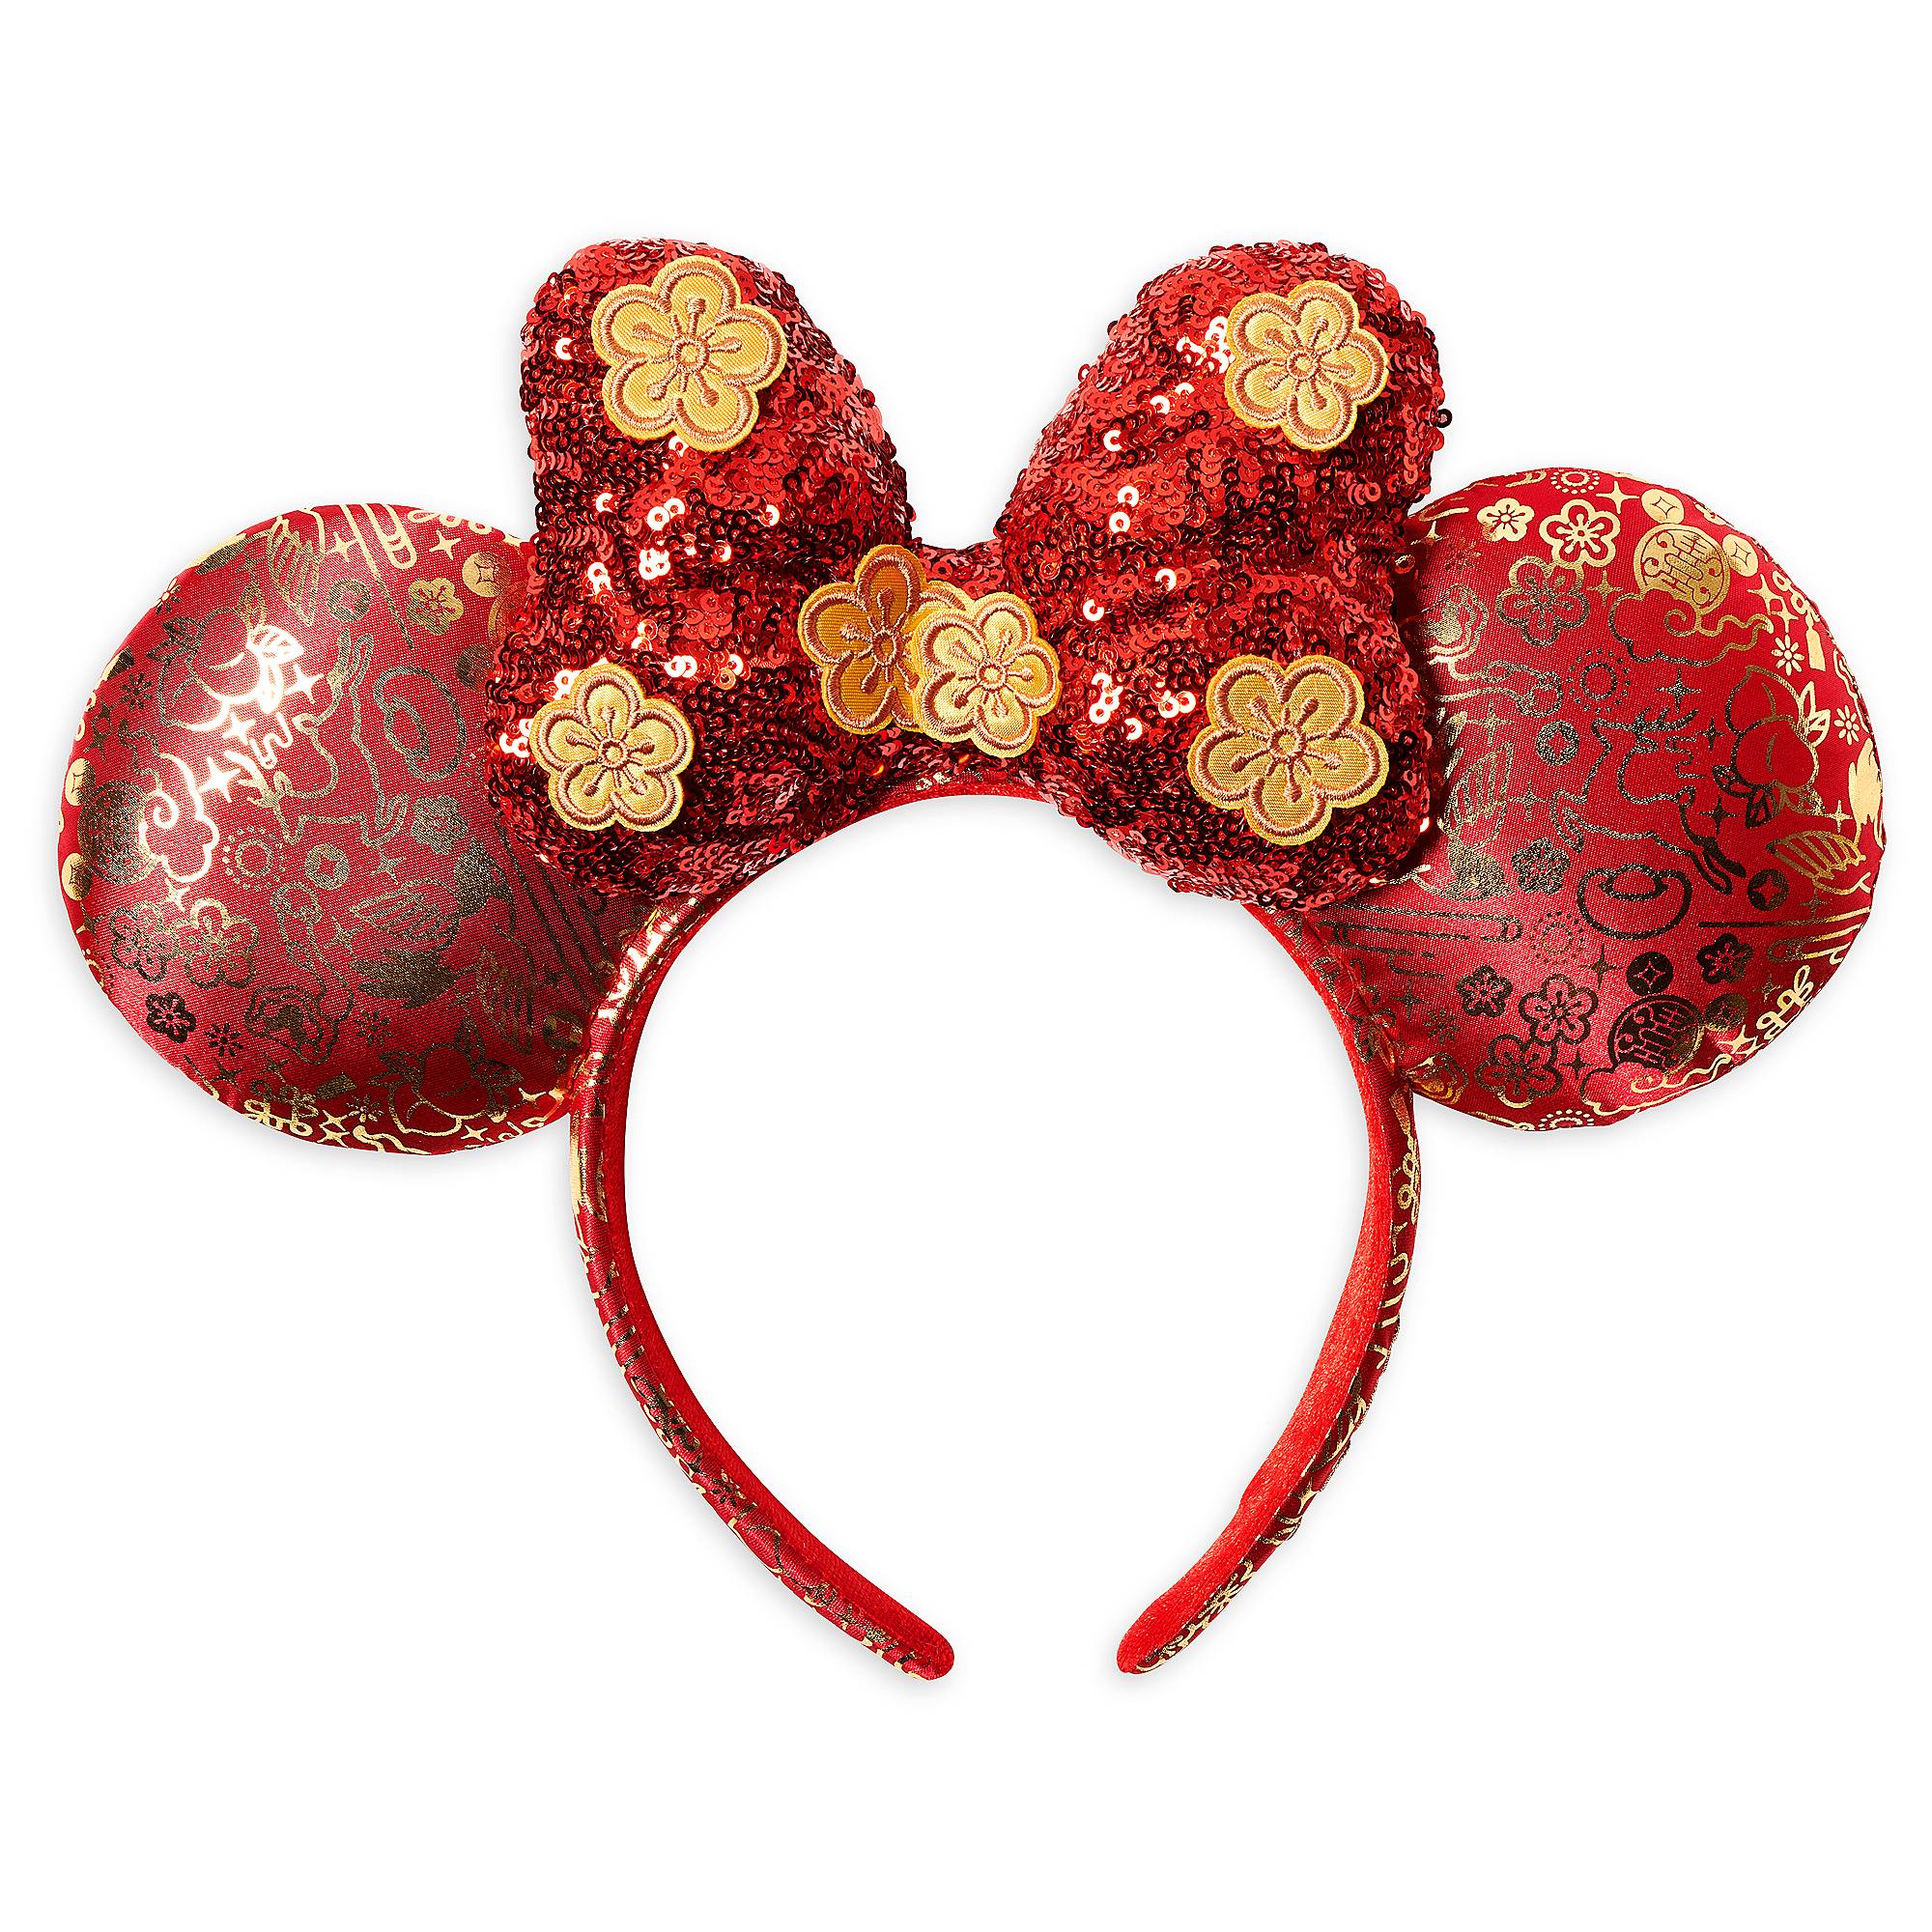 Minnie Mouse Ear Headband for Adults – Lunar New Year 2021 image